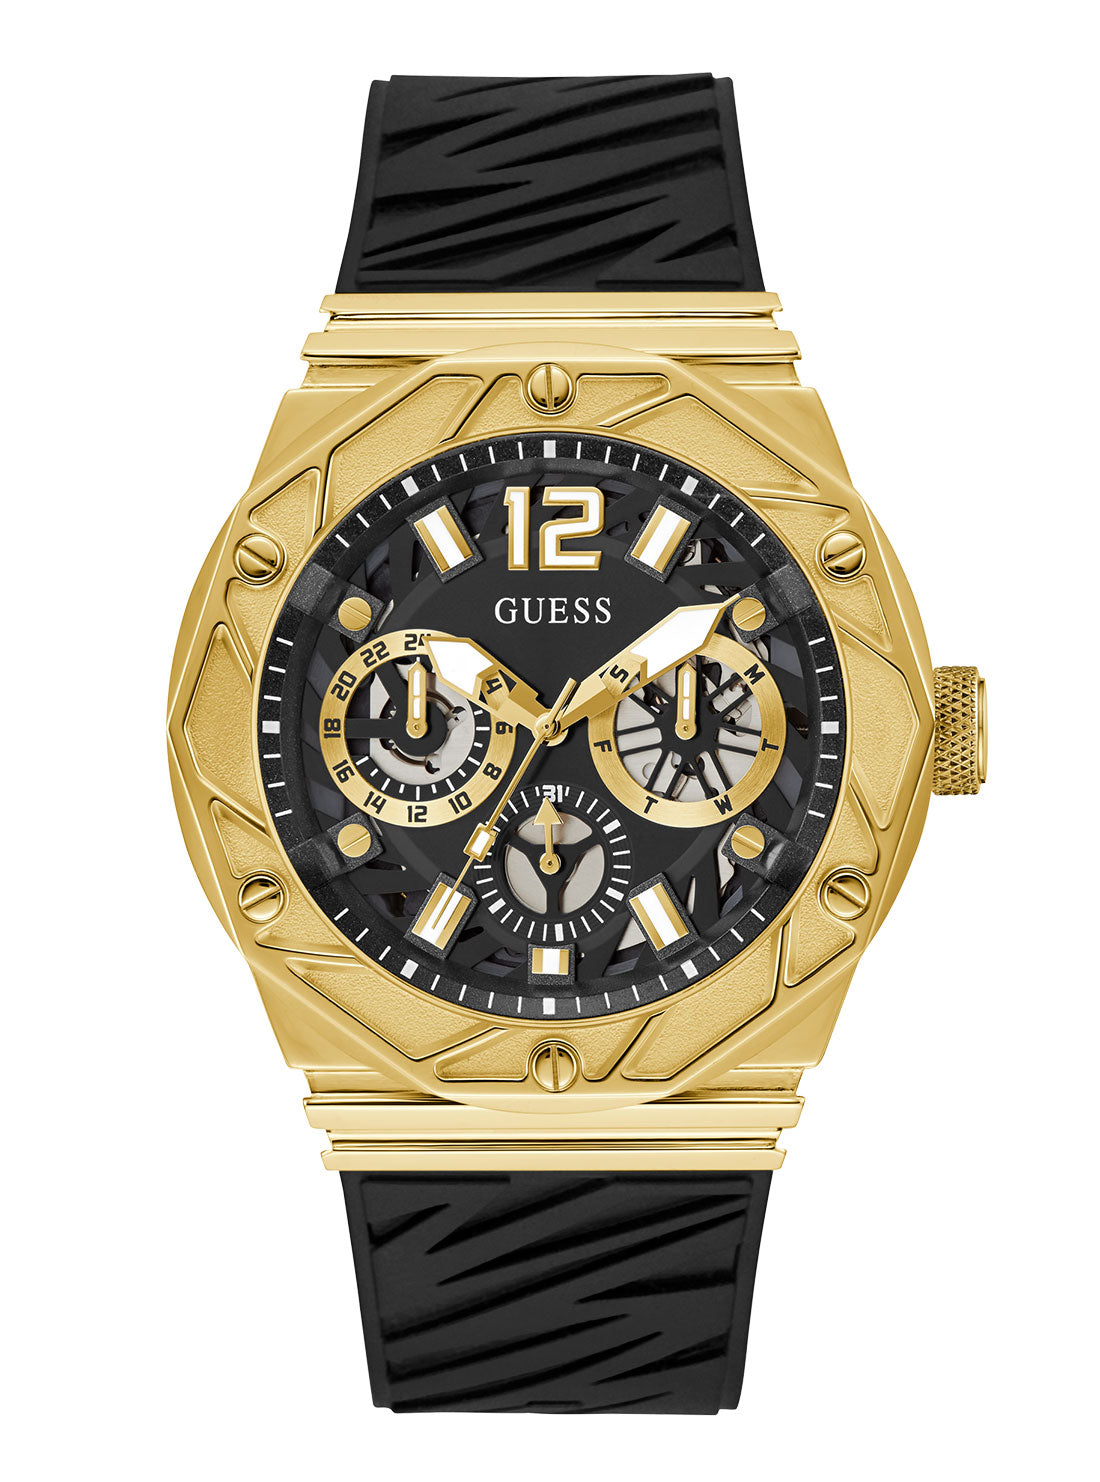 GUESS Men's Black Gold Rival Silicone Watch GW0634G2 Front View